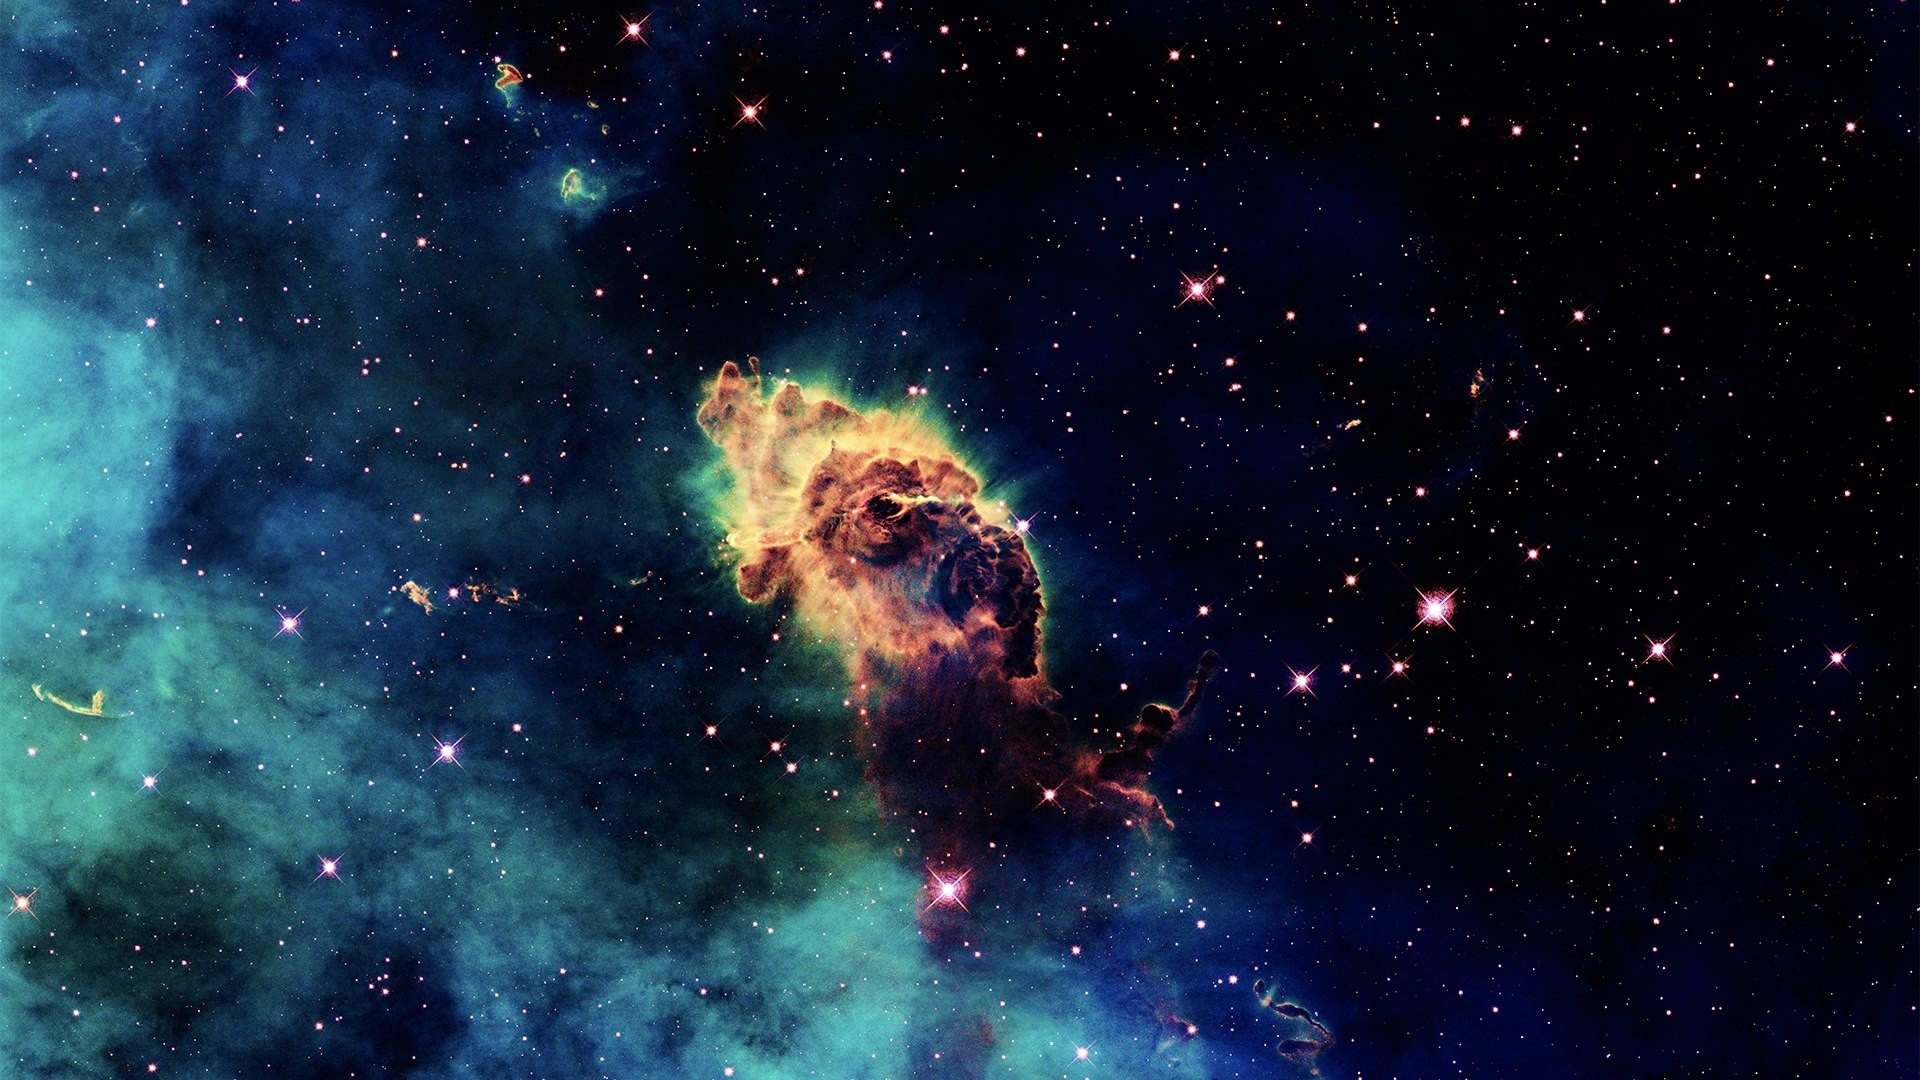 69+ real space wallpapers ·① download free stunning backgrounds for